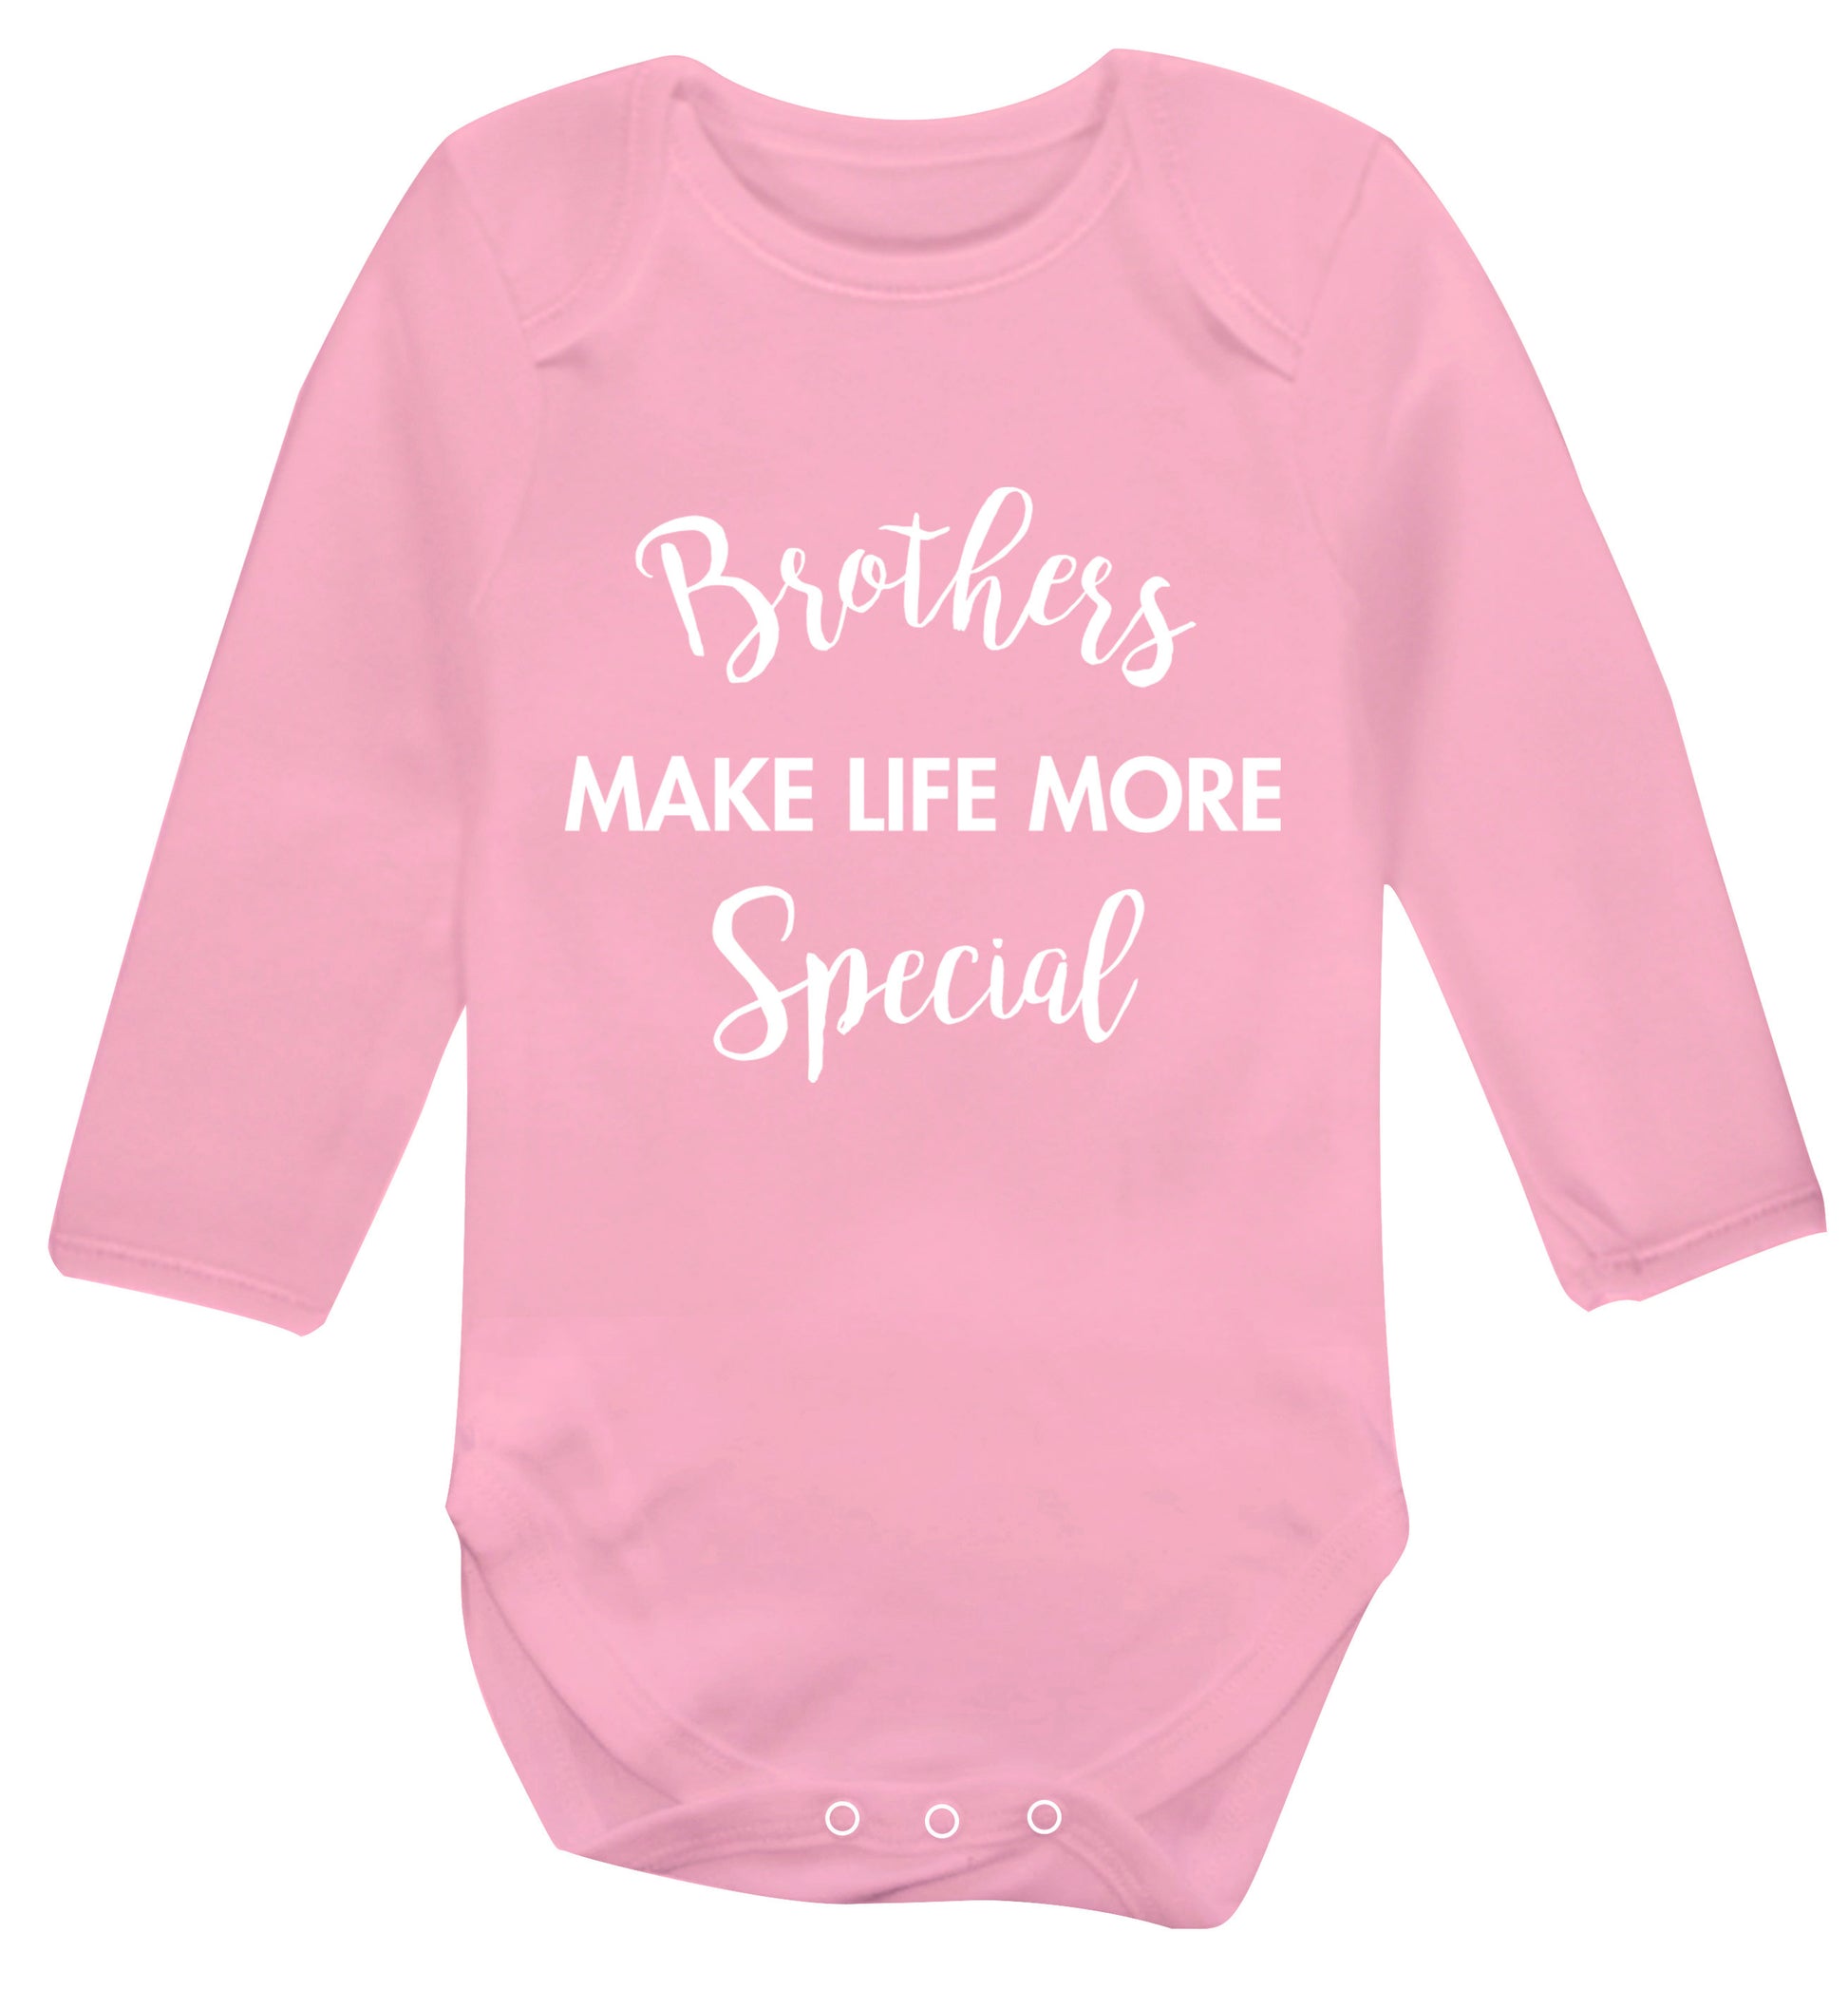 Brothers make life more special Baby Vest long sleeved pale pink 6-12 months